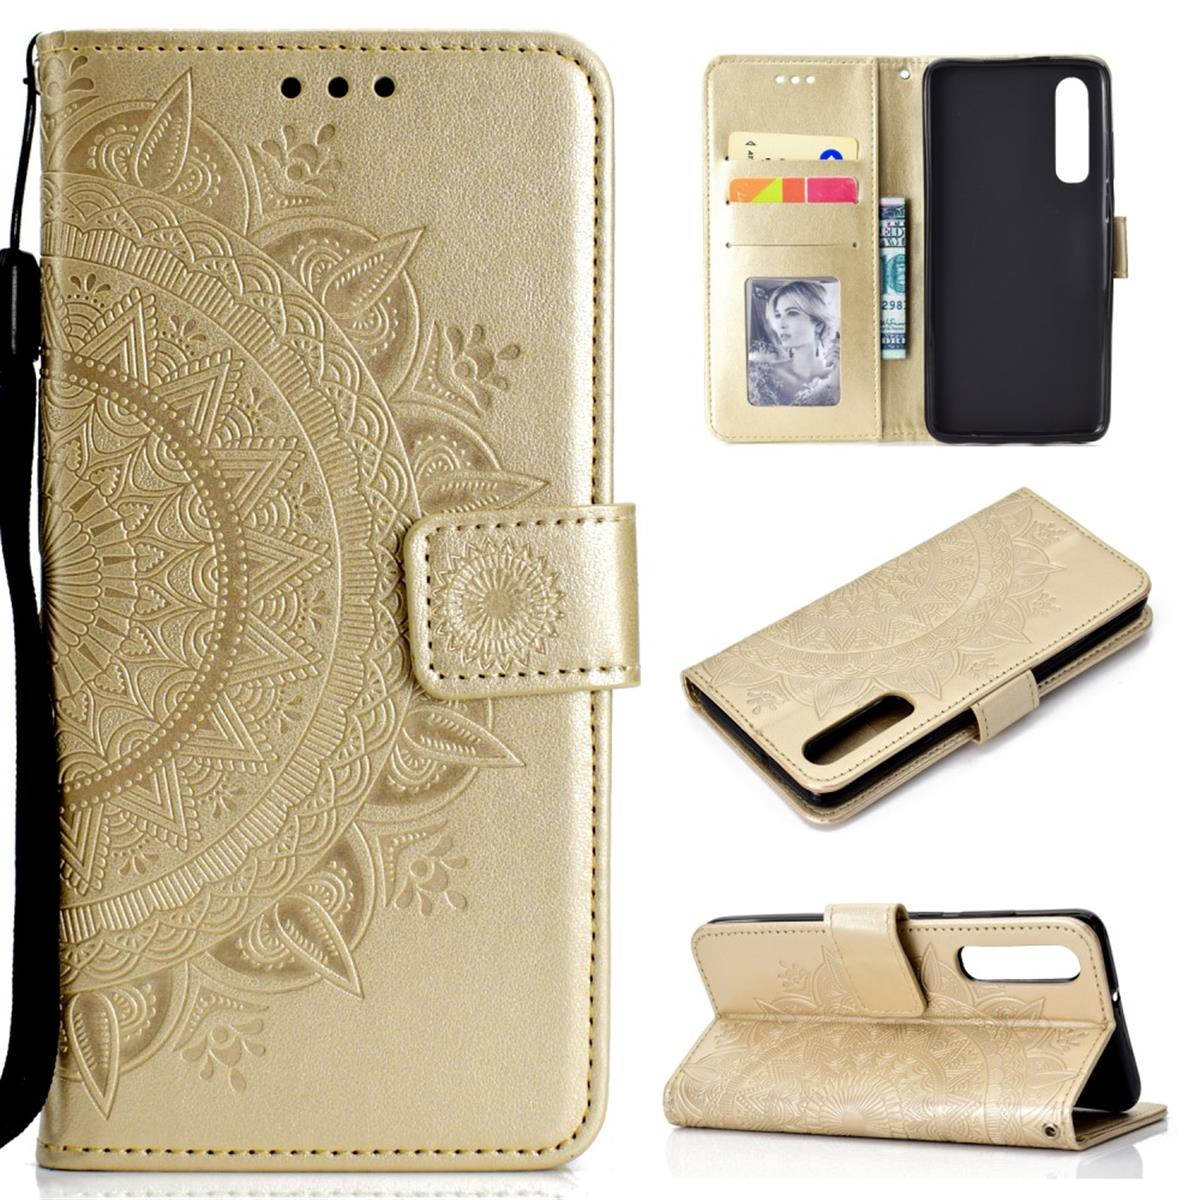 COVERKINGZ Klapphülle mit Huawei, P30, Gold Bookcover, Mandala Muster